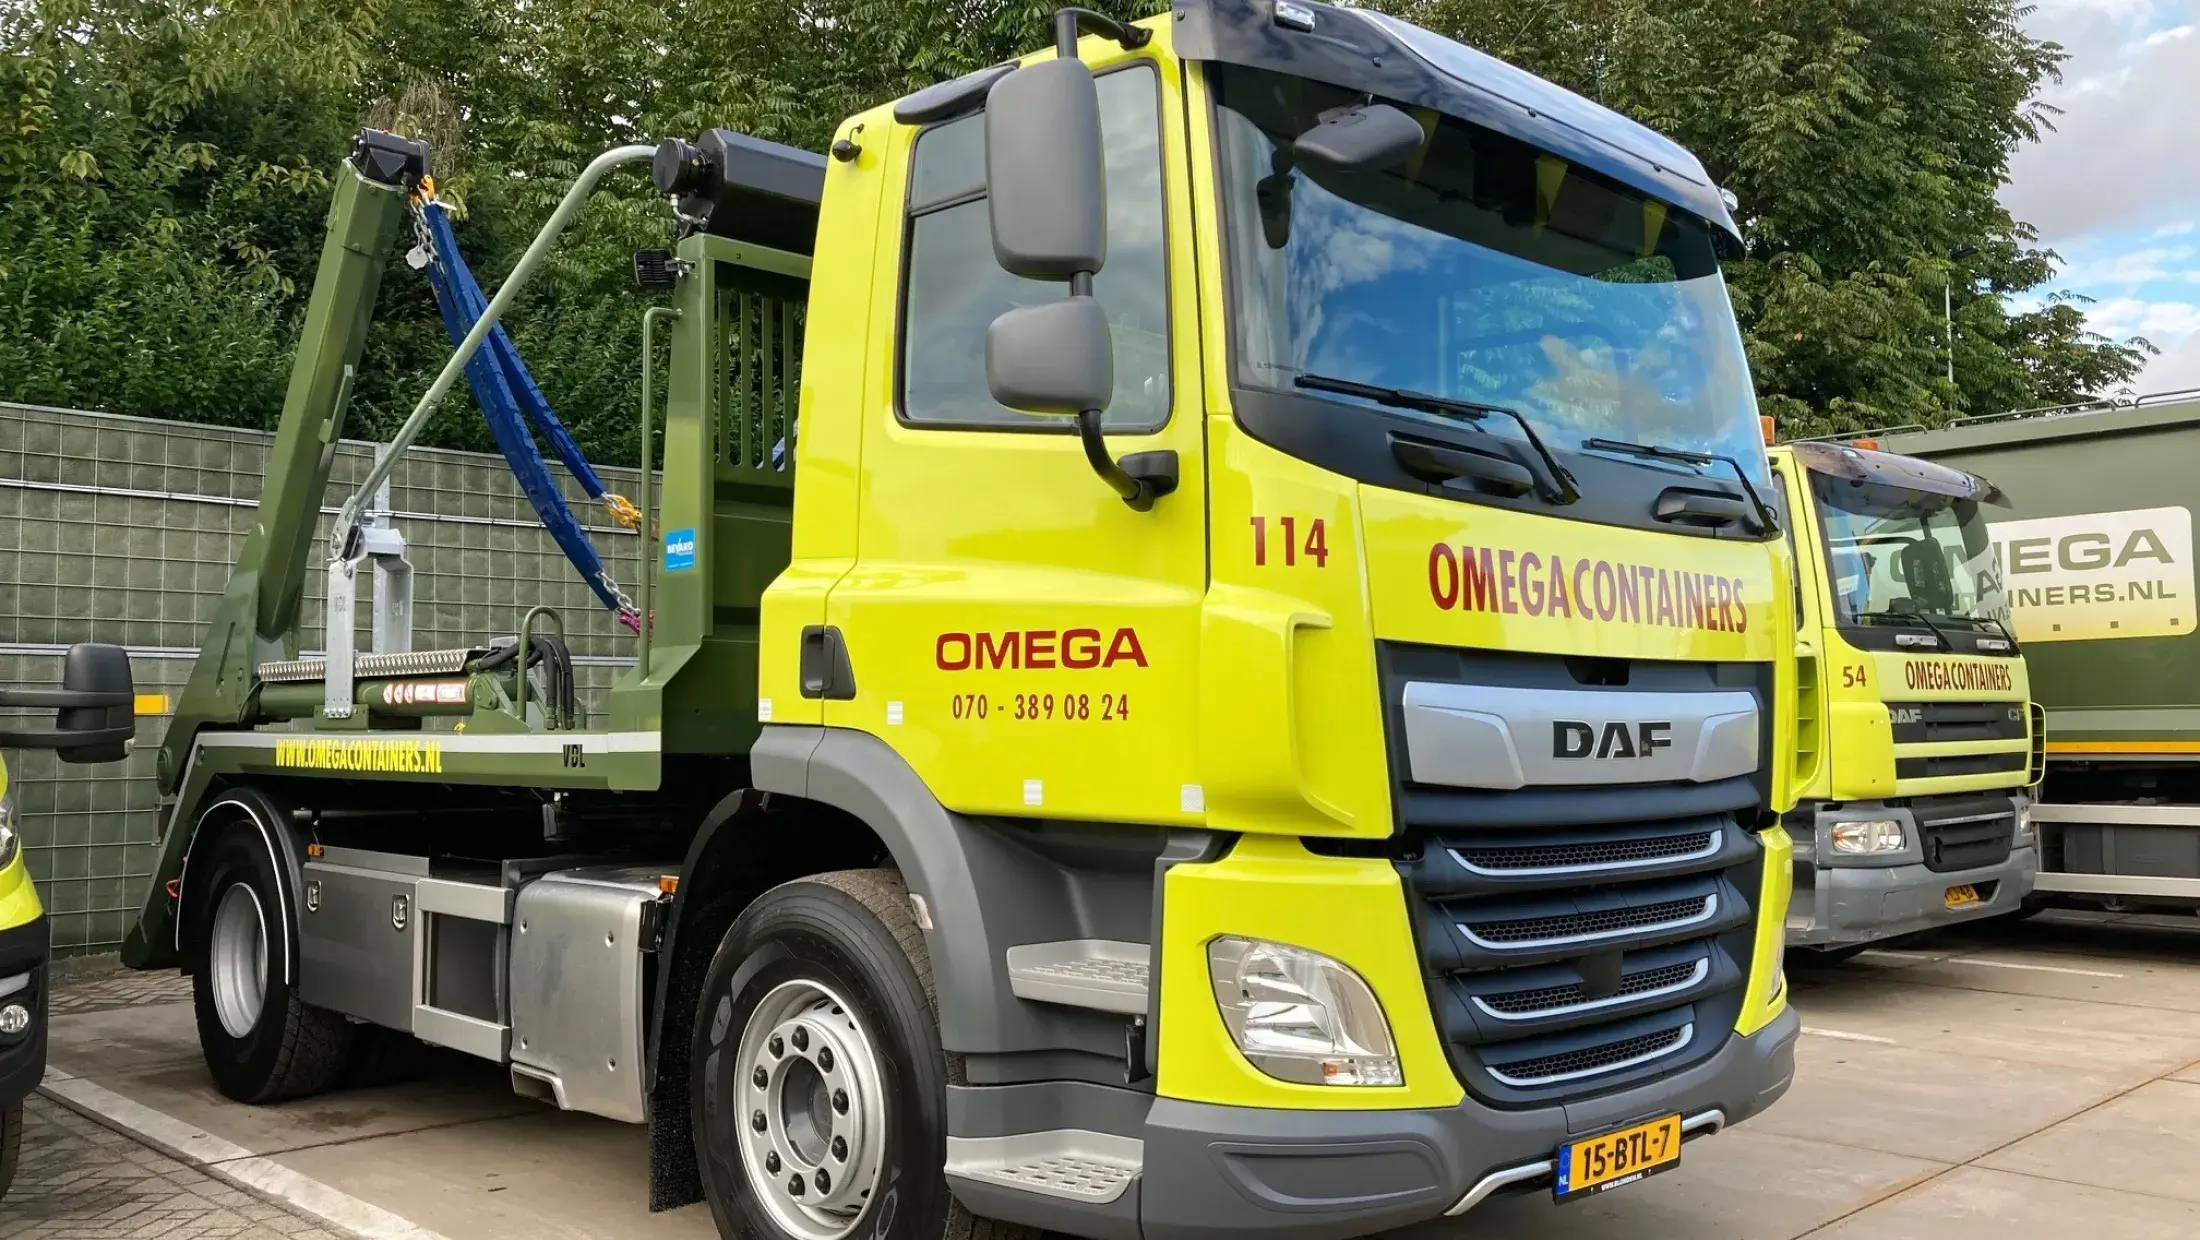 DAF CF 300 FA DC - Omega Containers Den Haag 